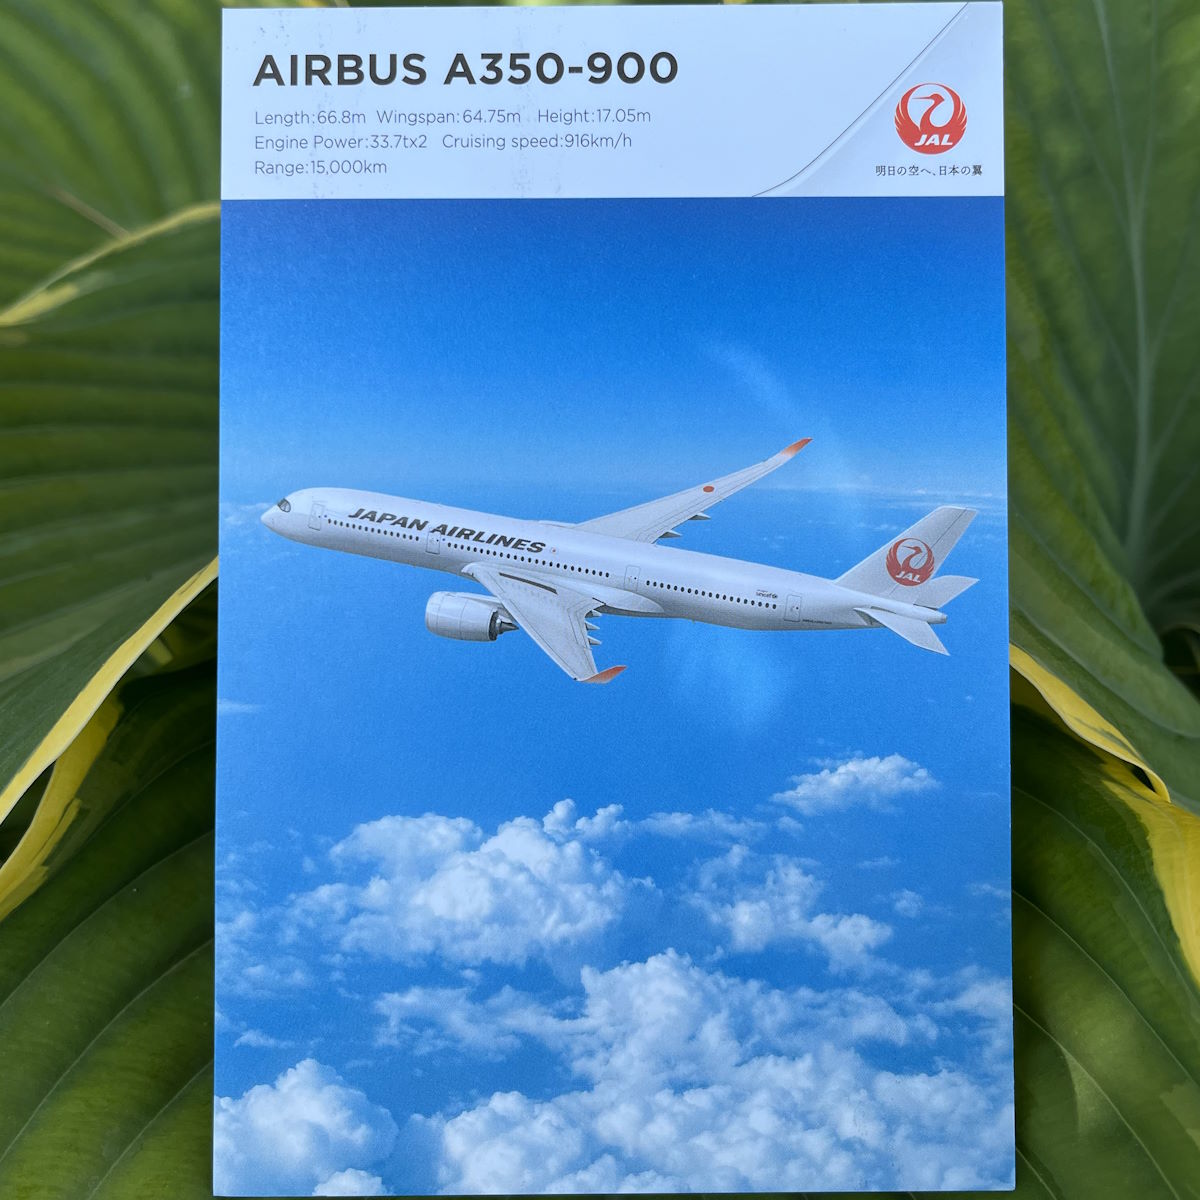 A Japan Airlines postcard of one of their A350-900 airplanes, showing statistics for this aircraft type.